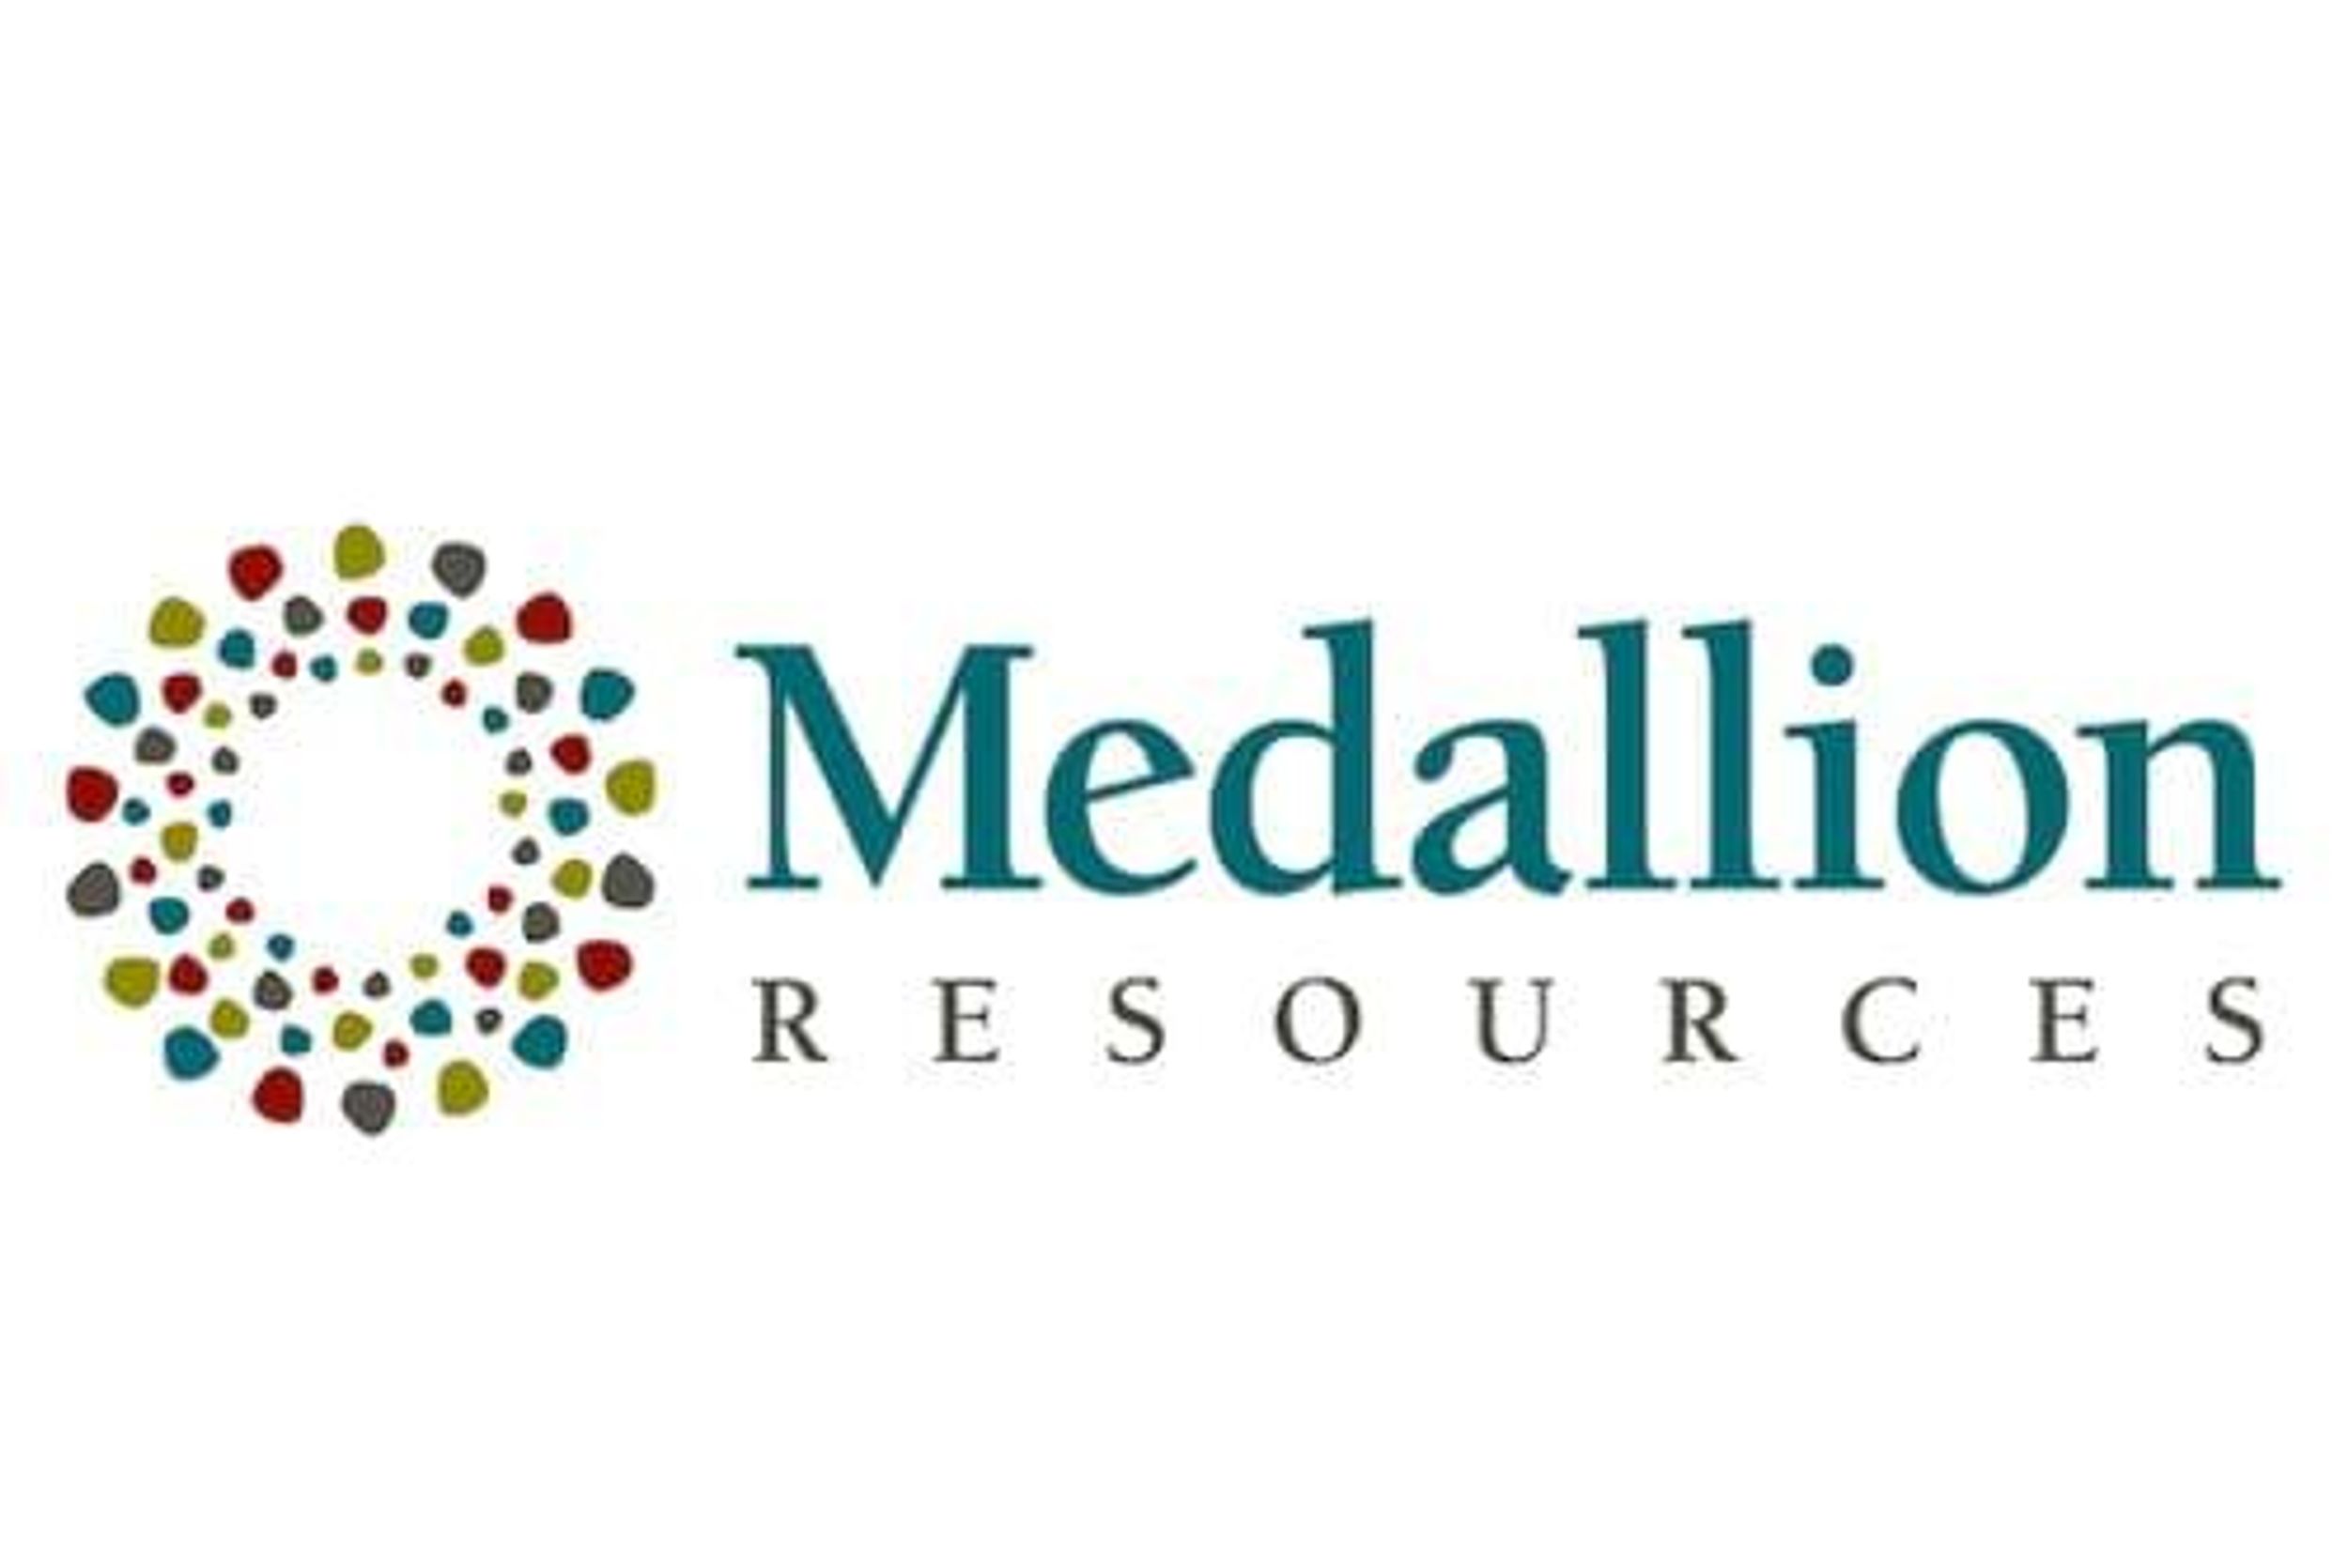 Medallion Resources Provides Clarification on Prior News Release Regarding REE Metallization and Magnet Recycling Partnership